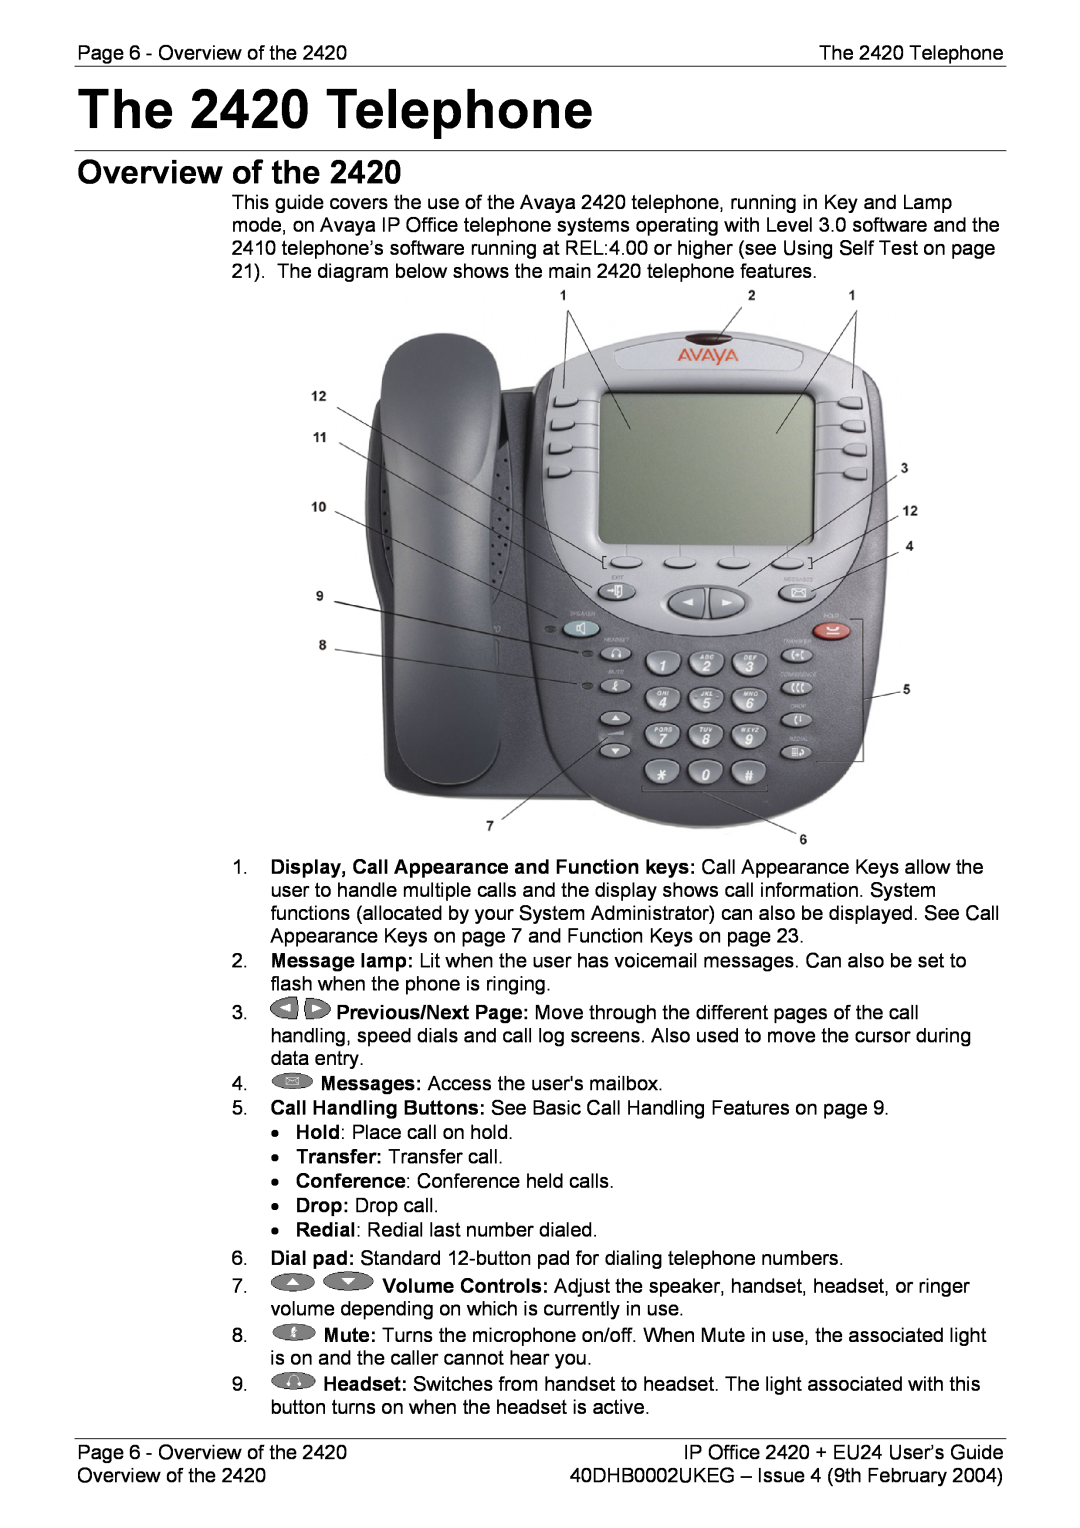 Avaya EU24 manual The 2420 Telephone, Overview of the 